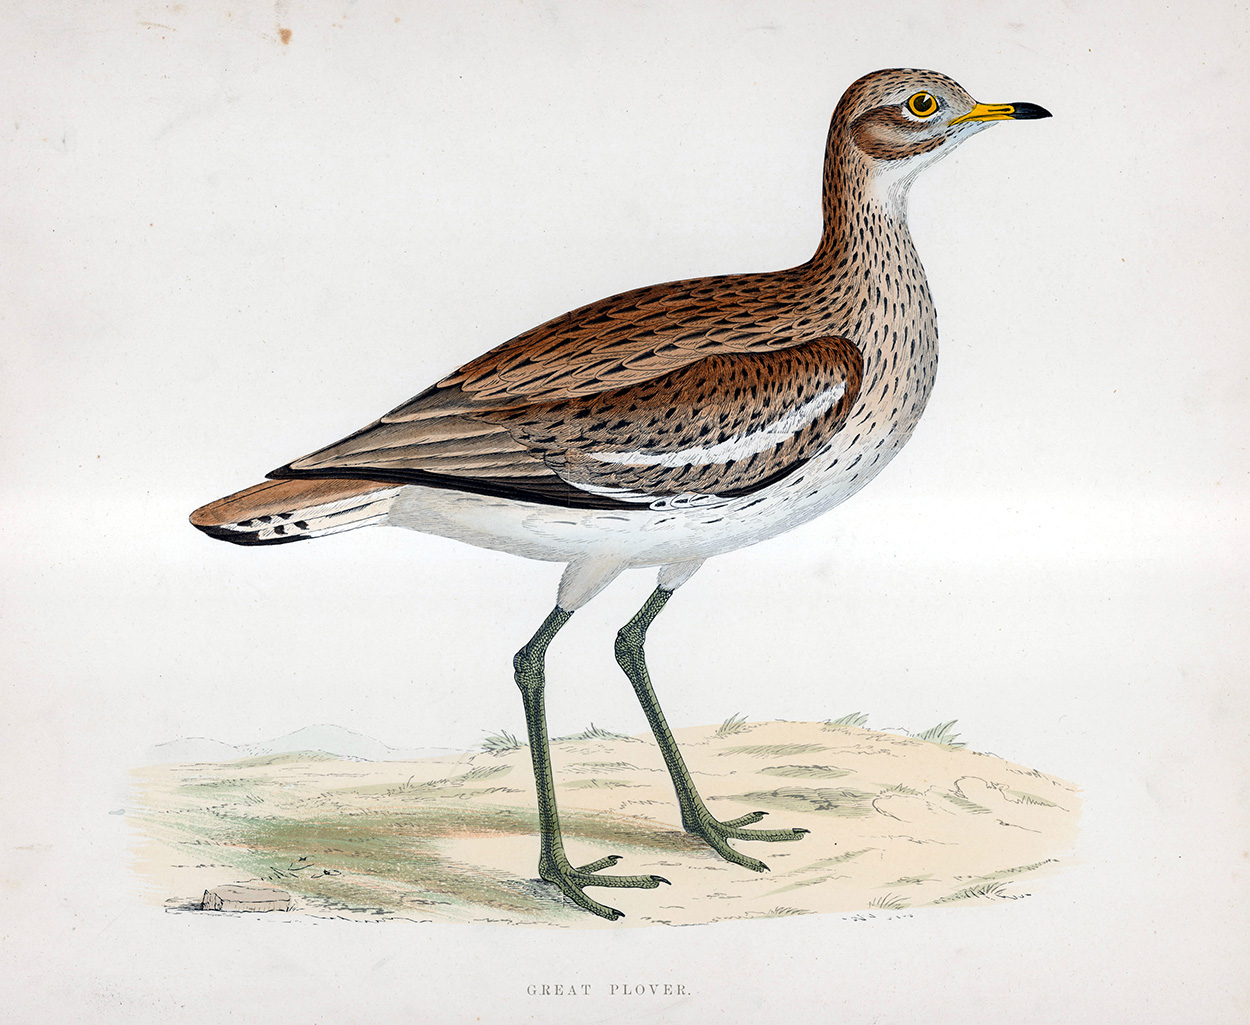 Great Plover - hand coloured lithograph 1891 (Print) art by Beverley R Morris at The Illustration Art Gallery